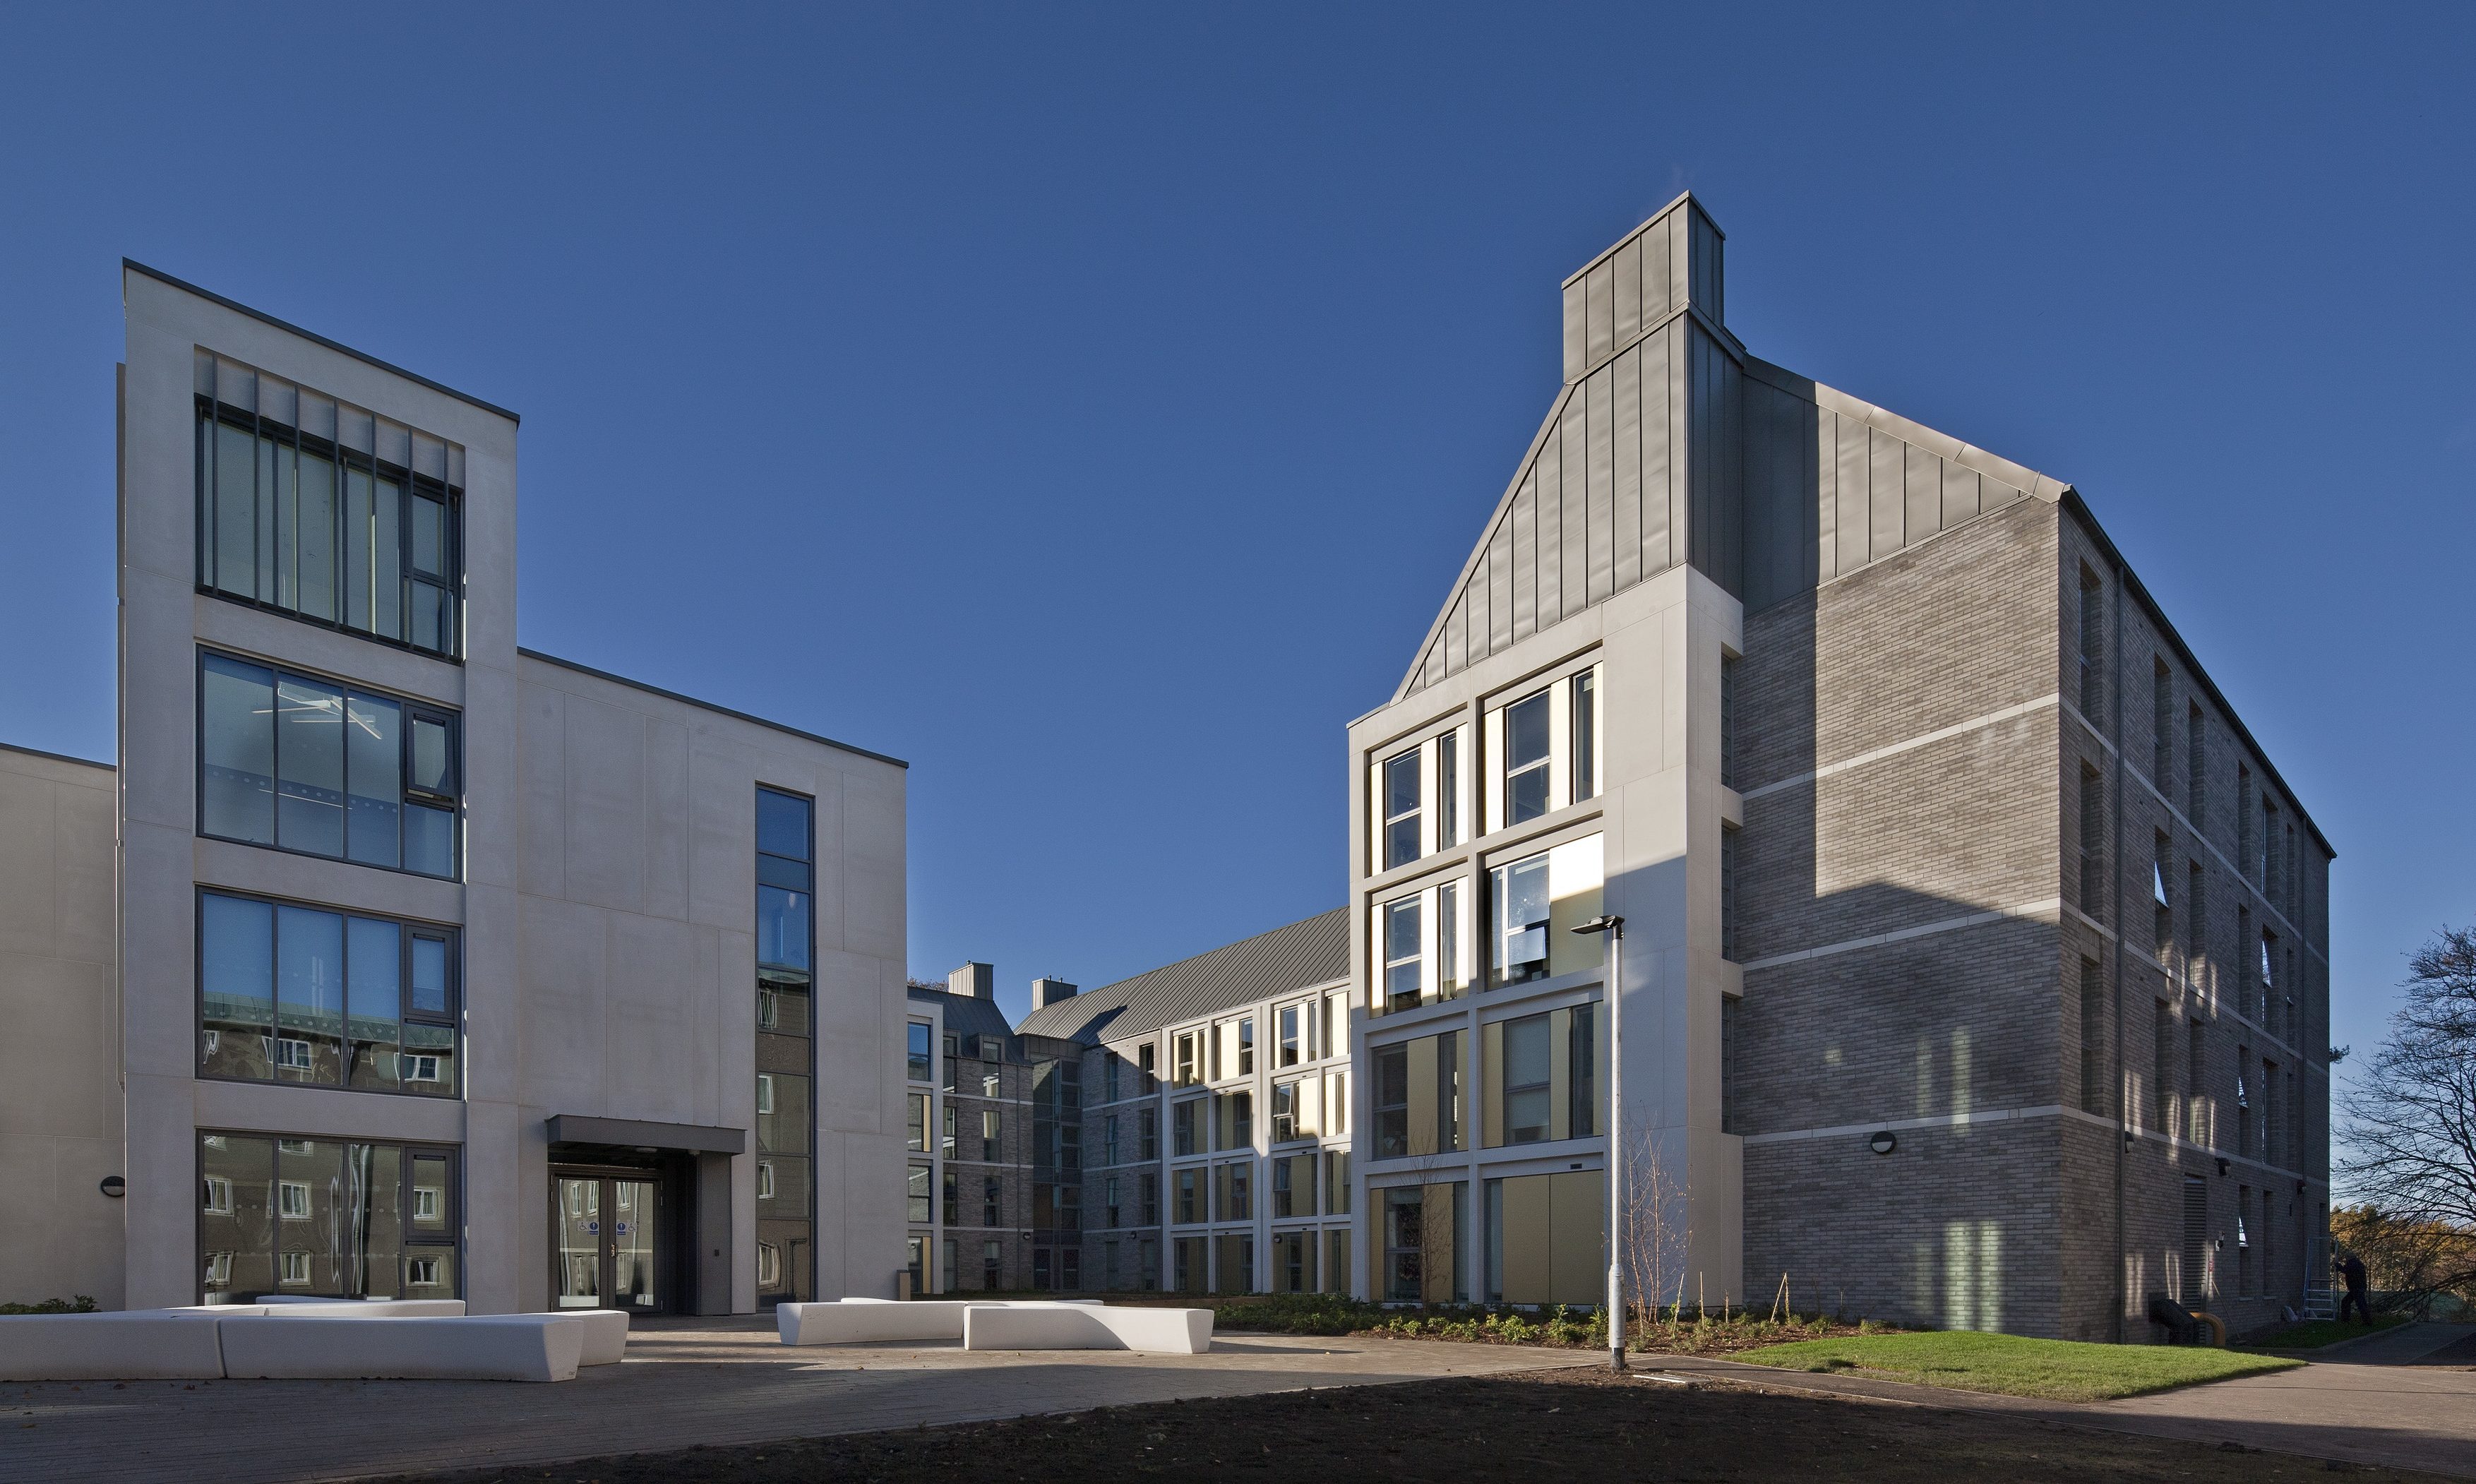 Whitehorn Hall student residence won a prize in the Scottish Design Awards.